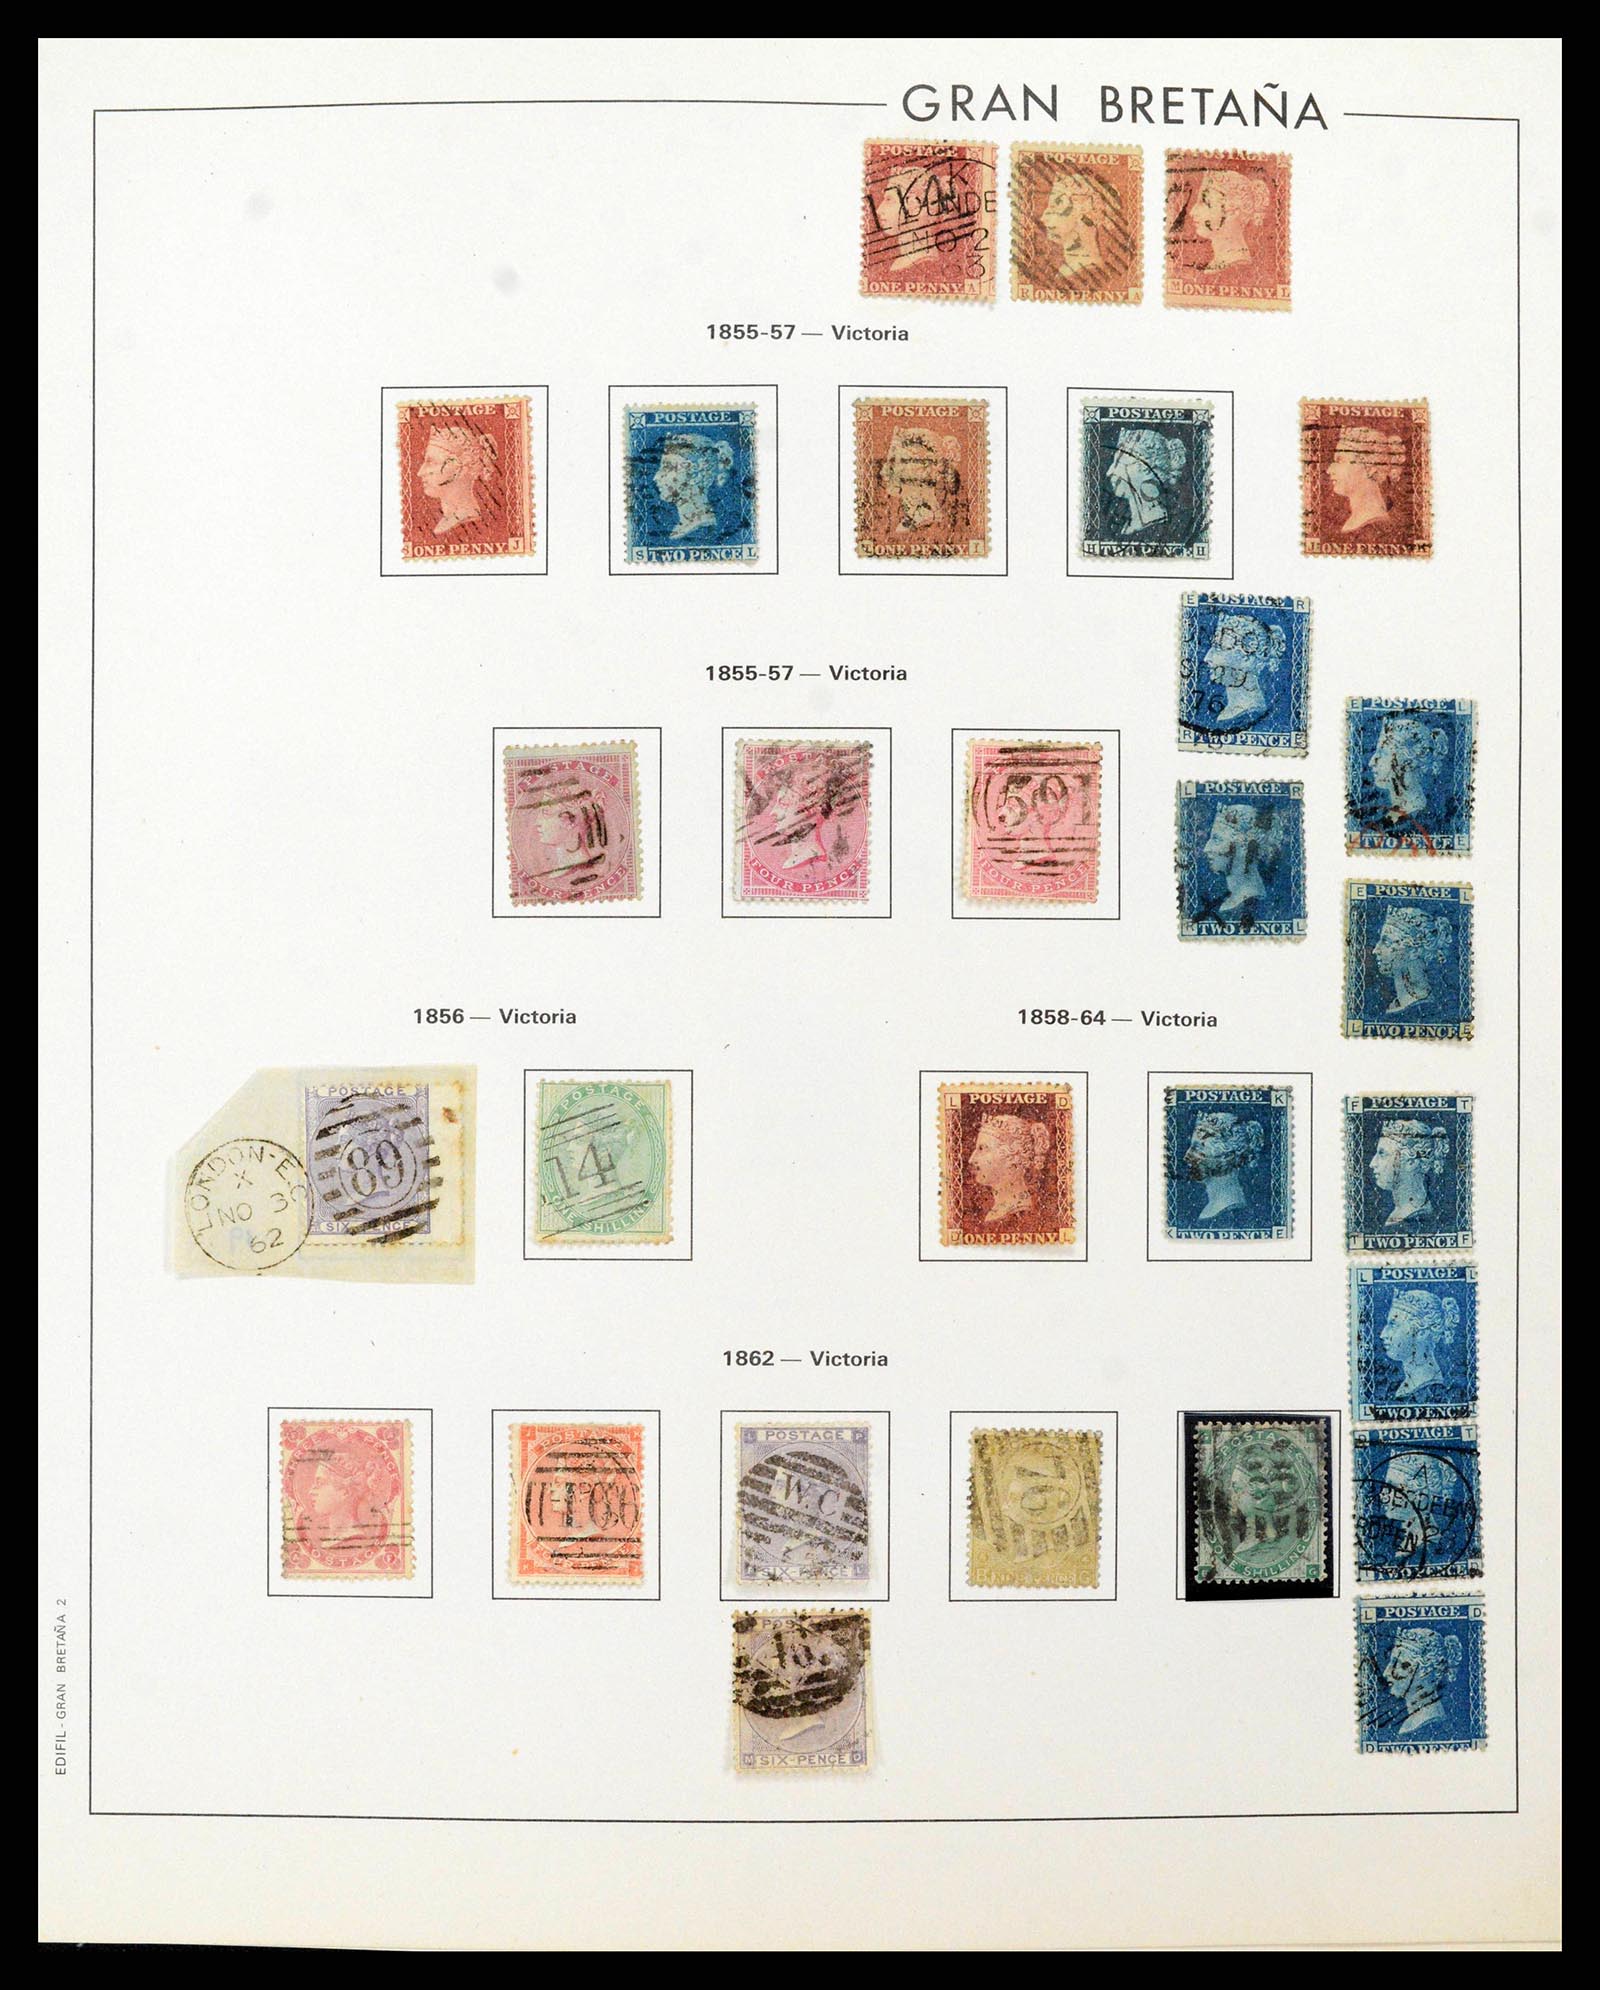 38924 0003 - Stamp collection 38924 Great Britain 1840-2000.